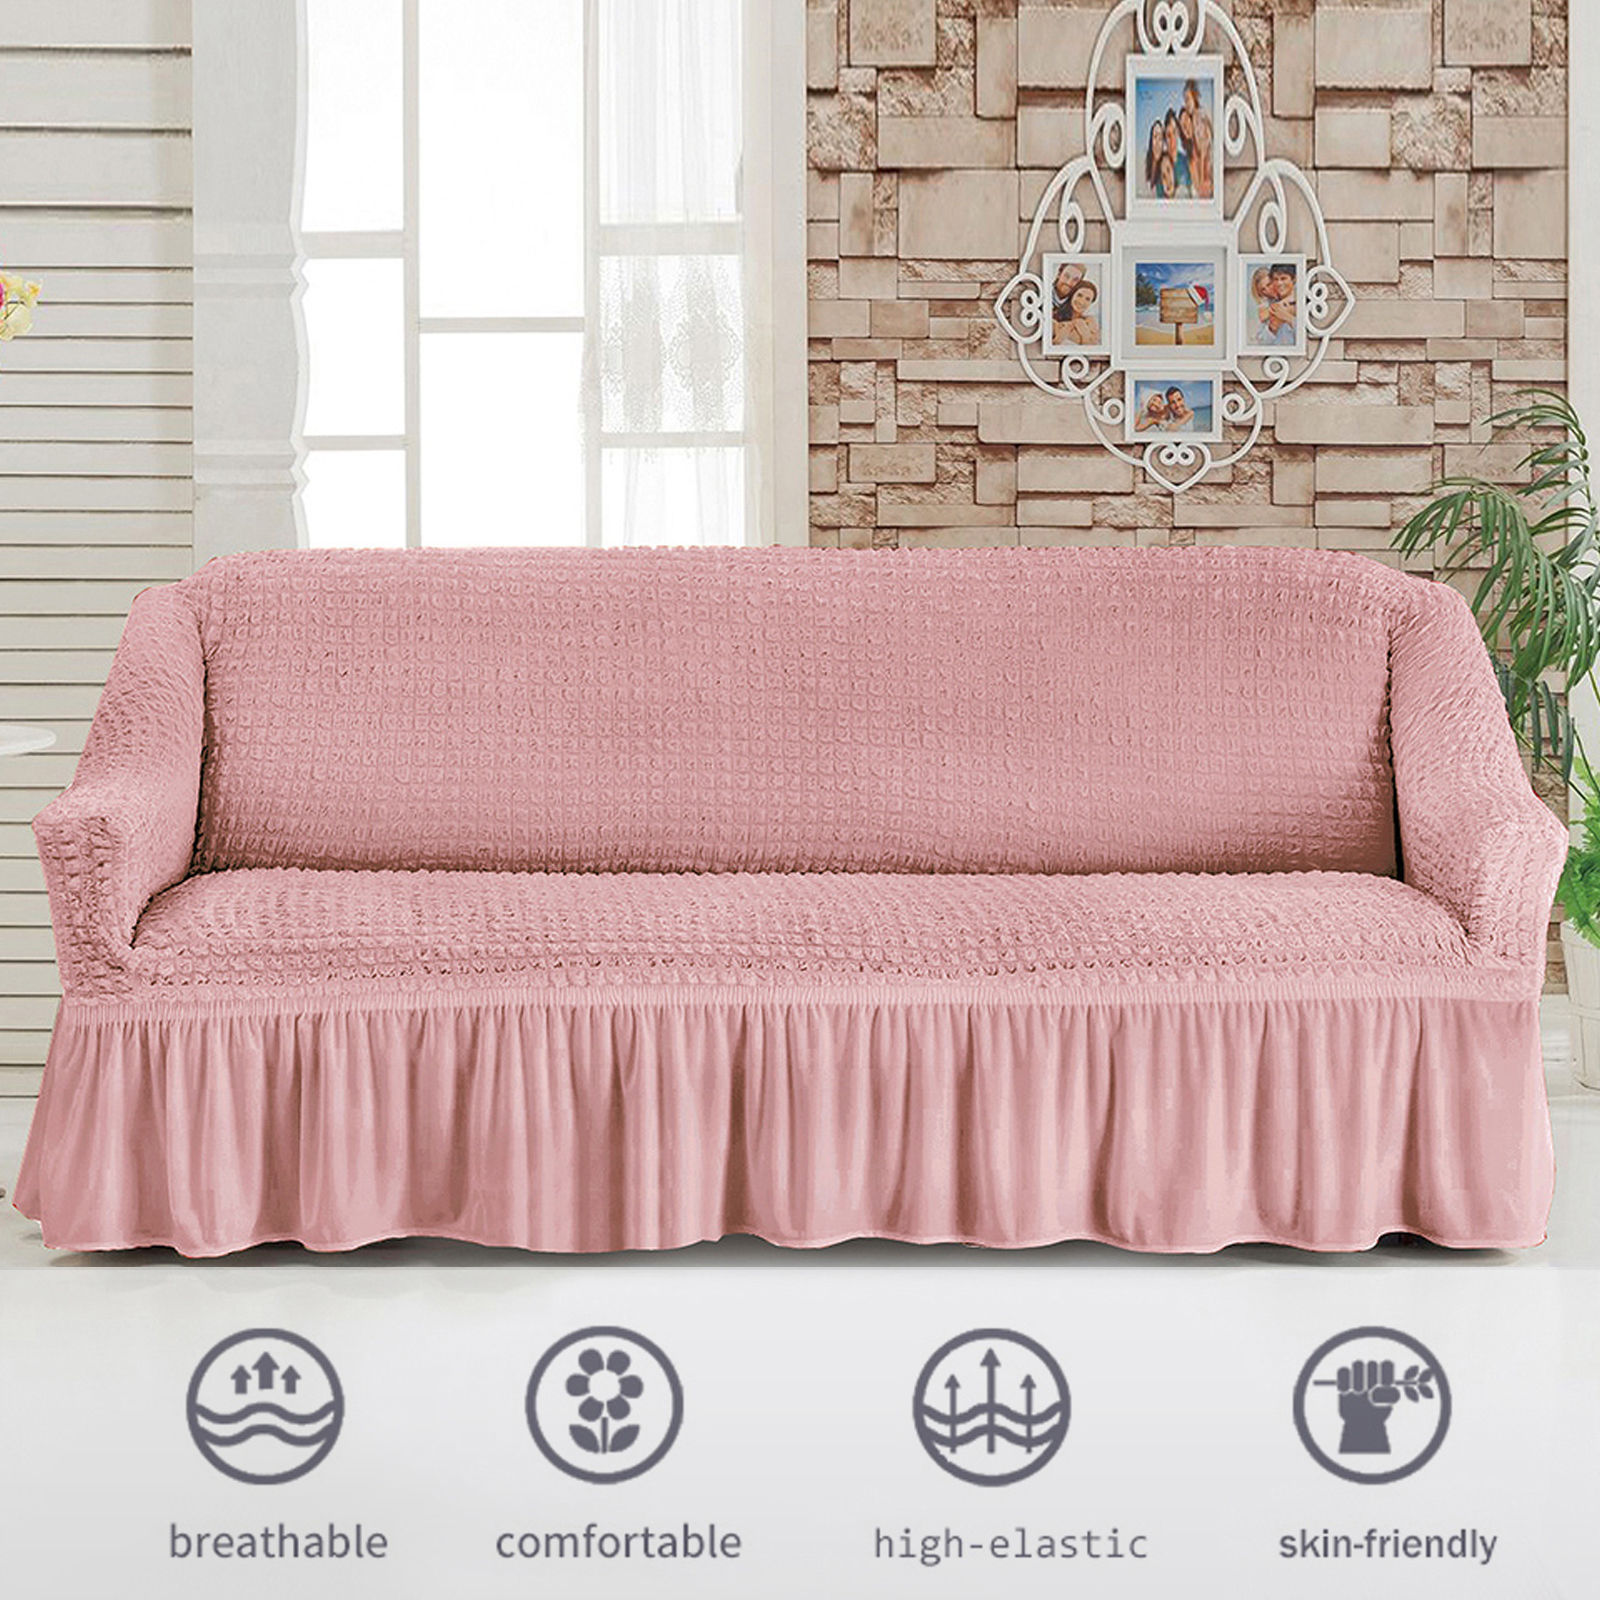 Stretch Sofa Slipcover, 3 Seater Sofa Slipcovers With Skirt With Armless Soft Sofa Cover Elastic Straps Sofa Slipcover For Living Room Kids Pets-Pink-Medium